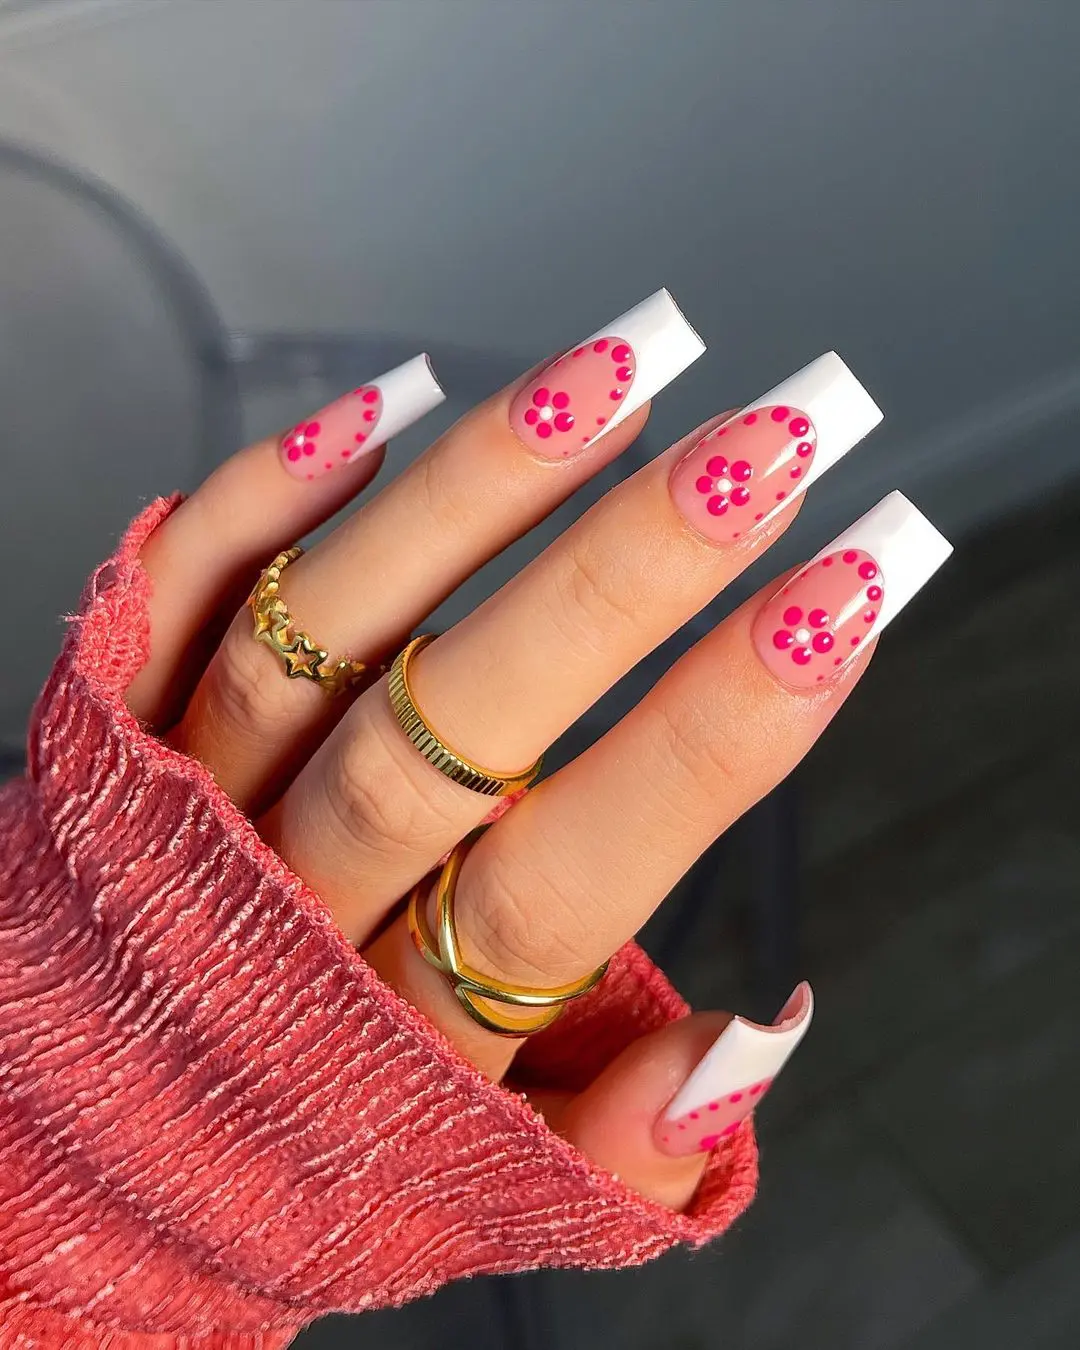 100+ Fall Nail Designs To Try This Autumn (Fall 2022) images 75